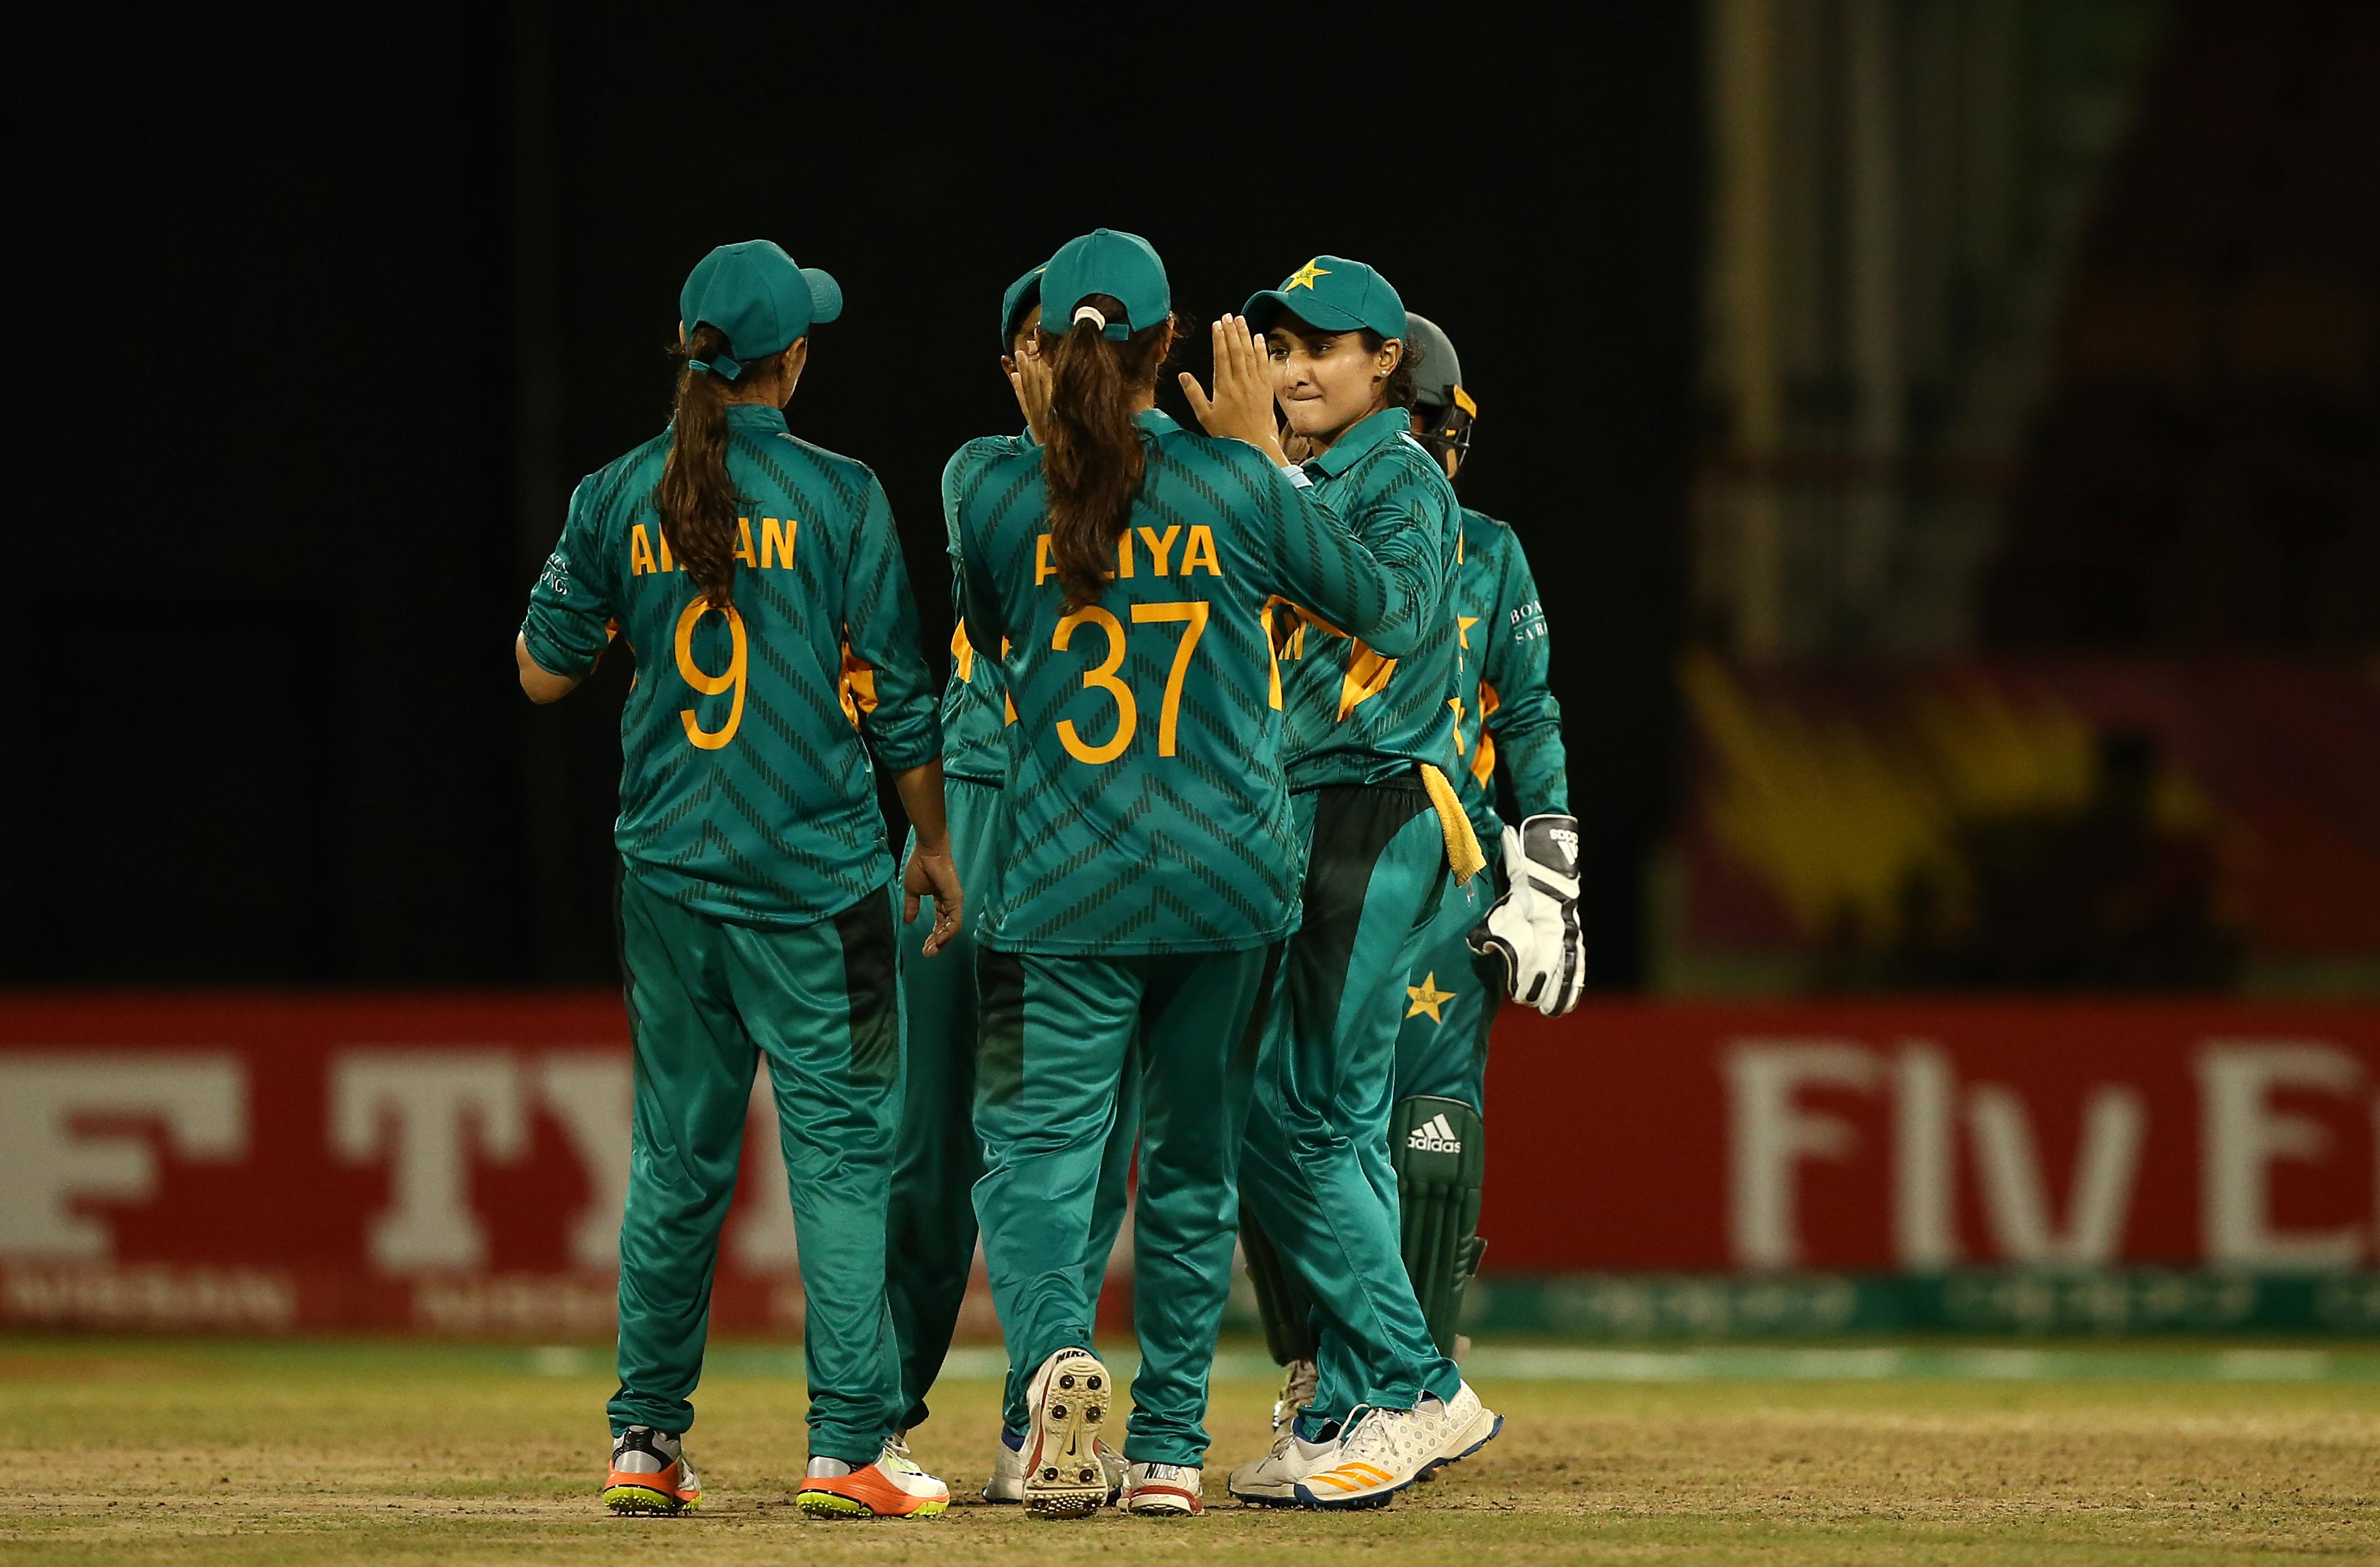 Pakistan women players delighted after interacting with Babar and Wasim | Getty Images